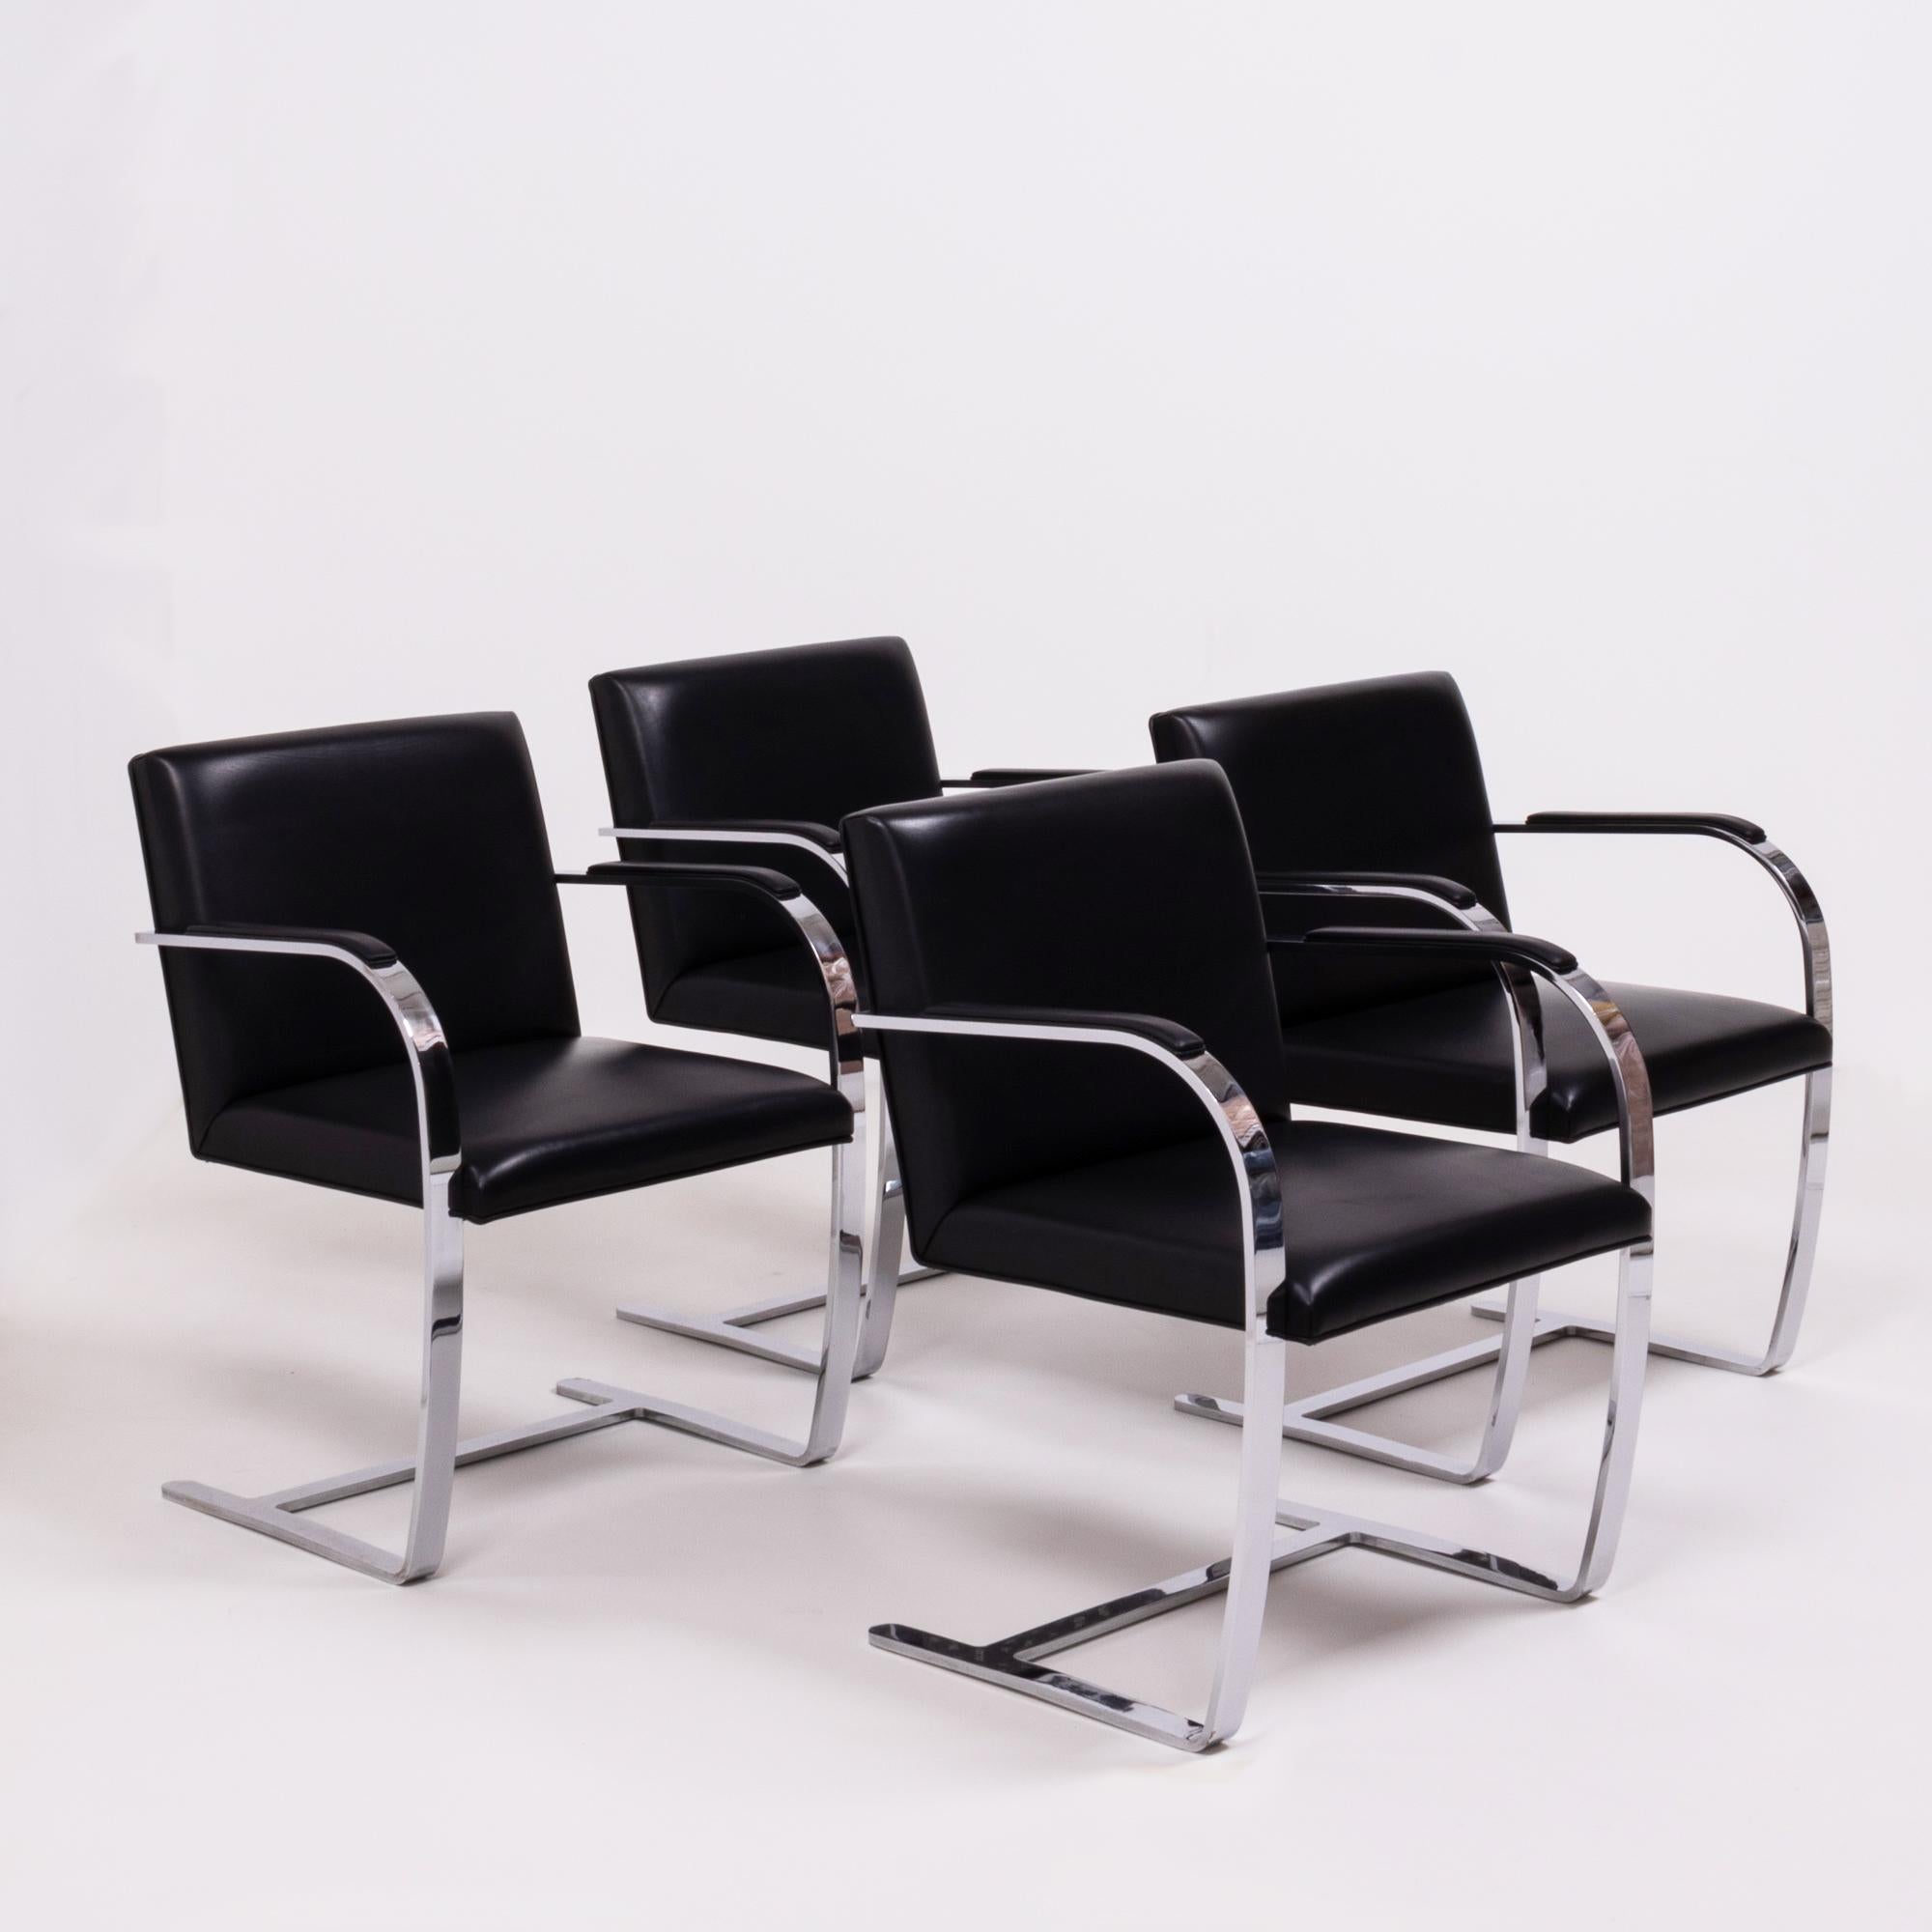 Originally designed by Mies van der Rohe in 1930 for his House in Brno, Czech Republic, the Brno chair remains a design icon.

Sleek and simple, this set of four chairs are upholstered in black leather and feature slim chrome frames with curved